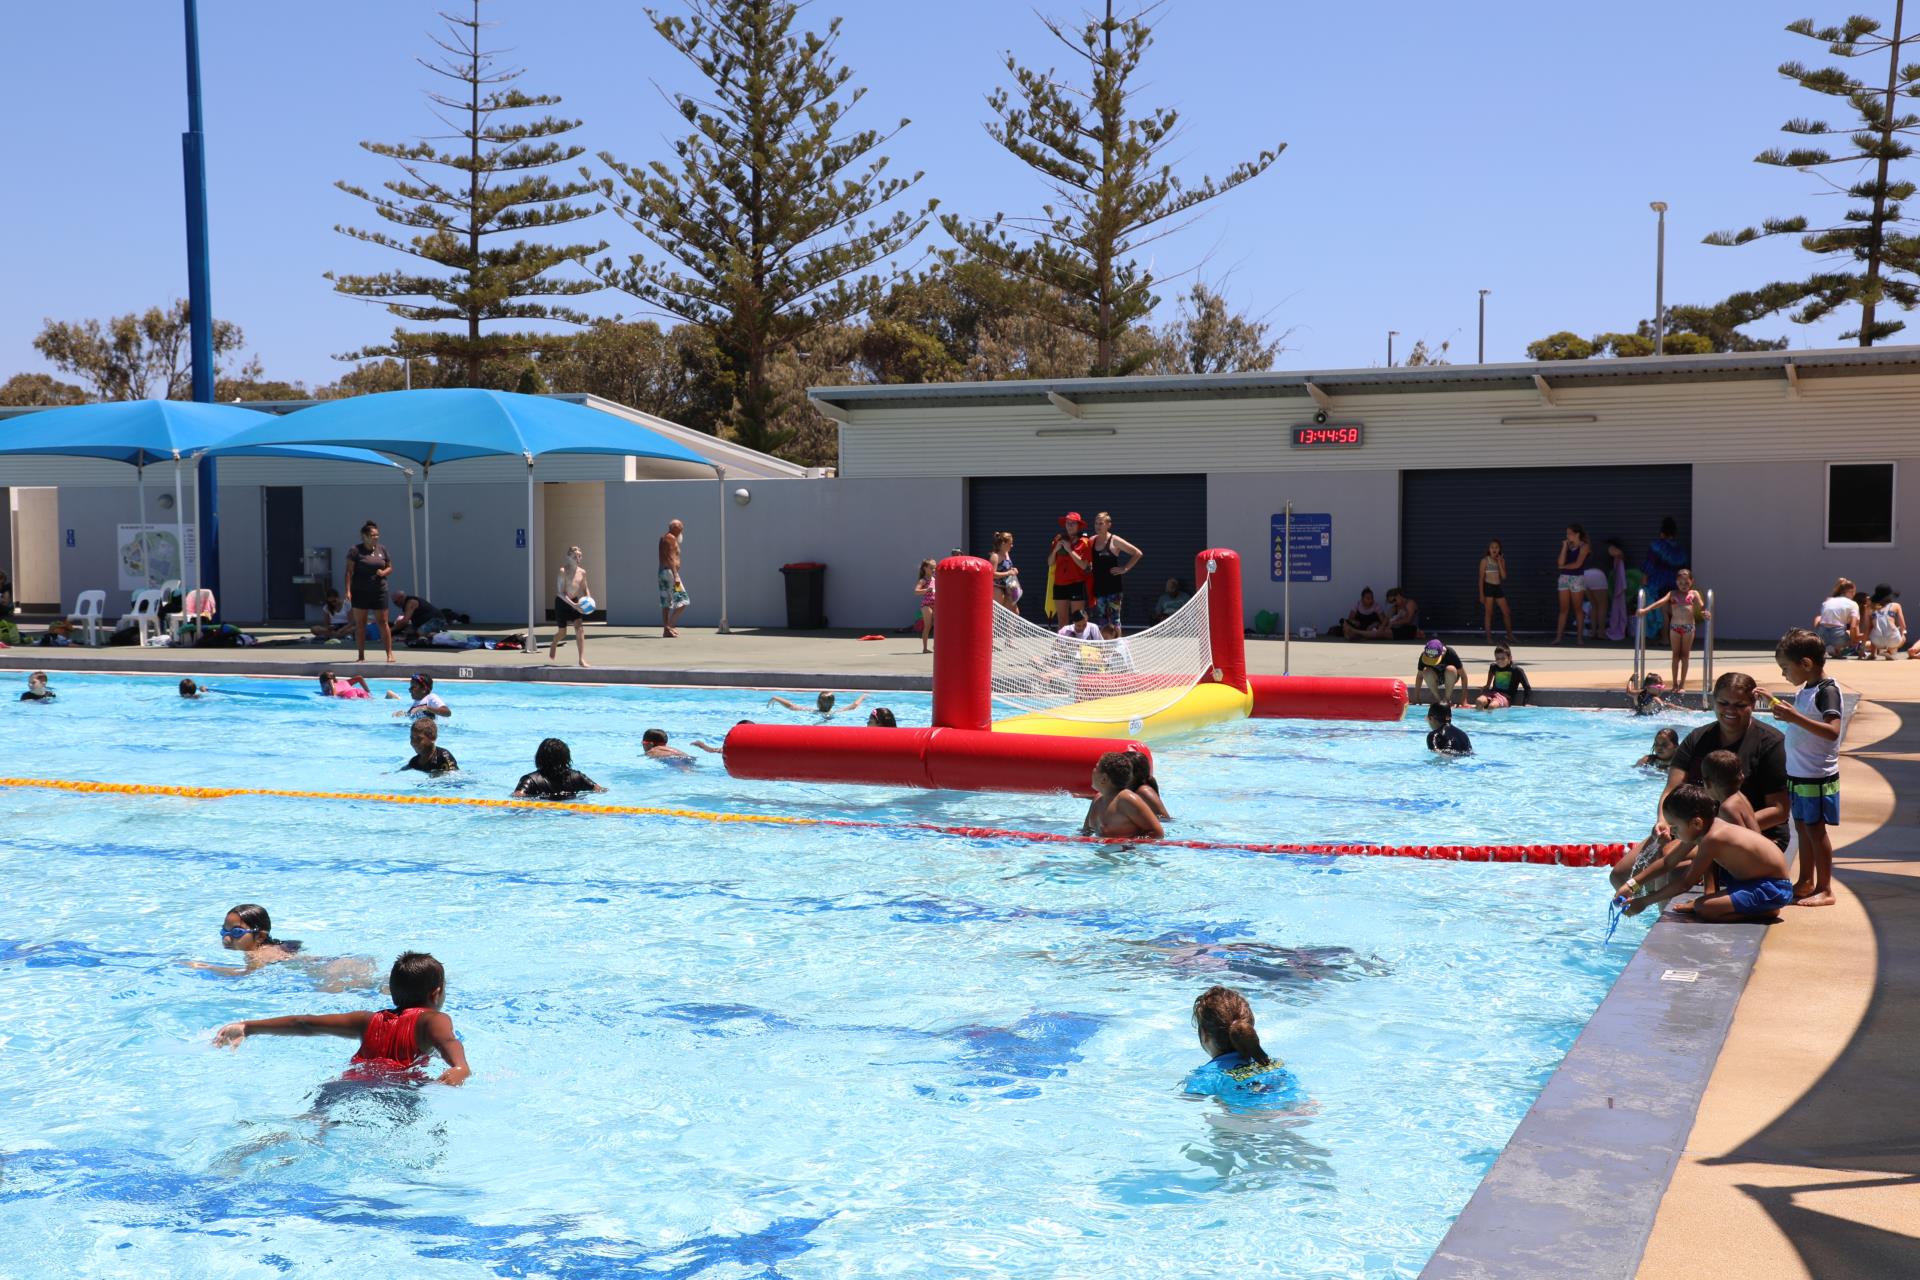 Cyclone Charlotte storm front delays outdoor pool upgrade